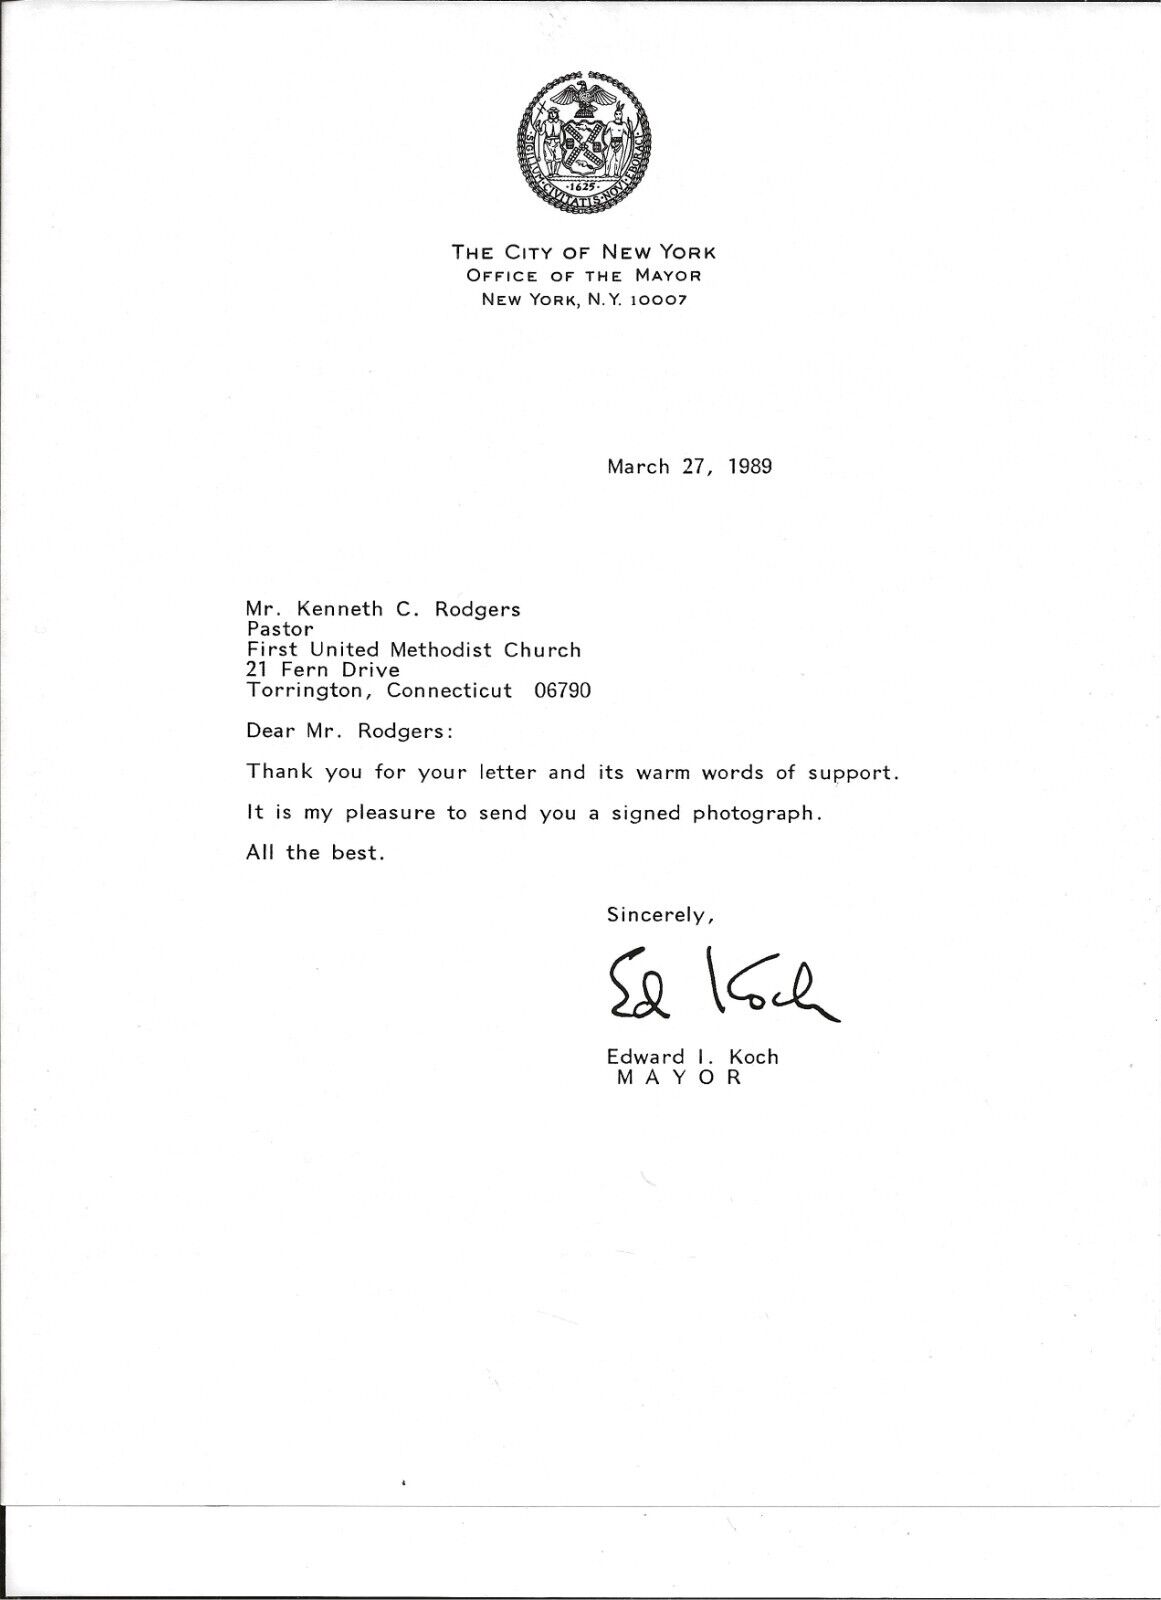 Ed Koch autographed typed letter 1989 as Mayor of New York City